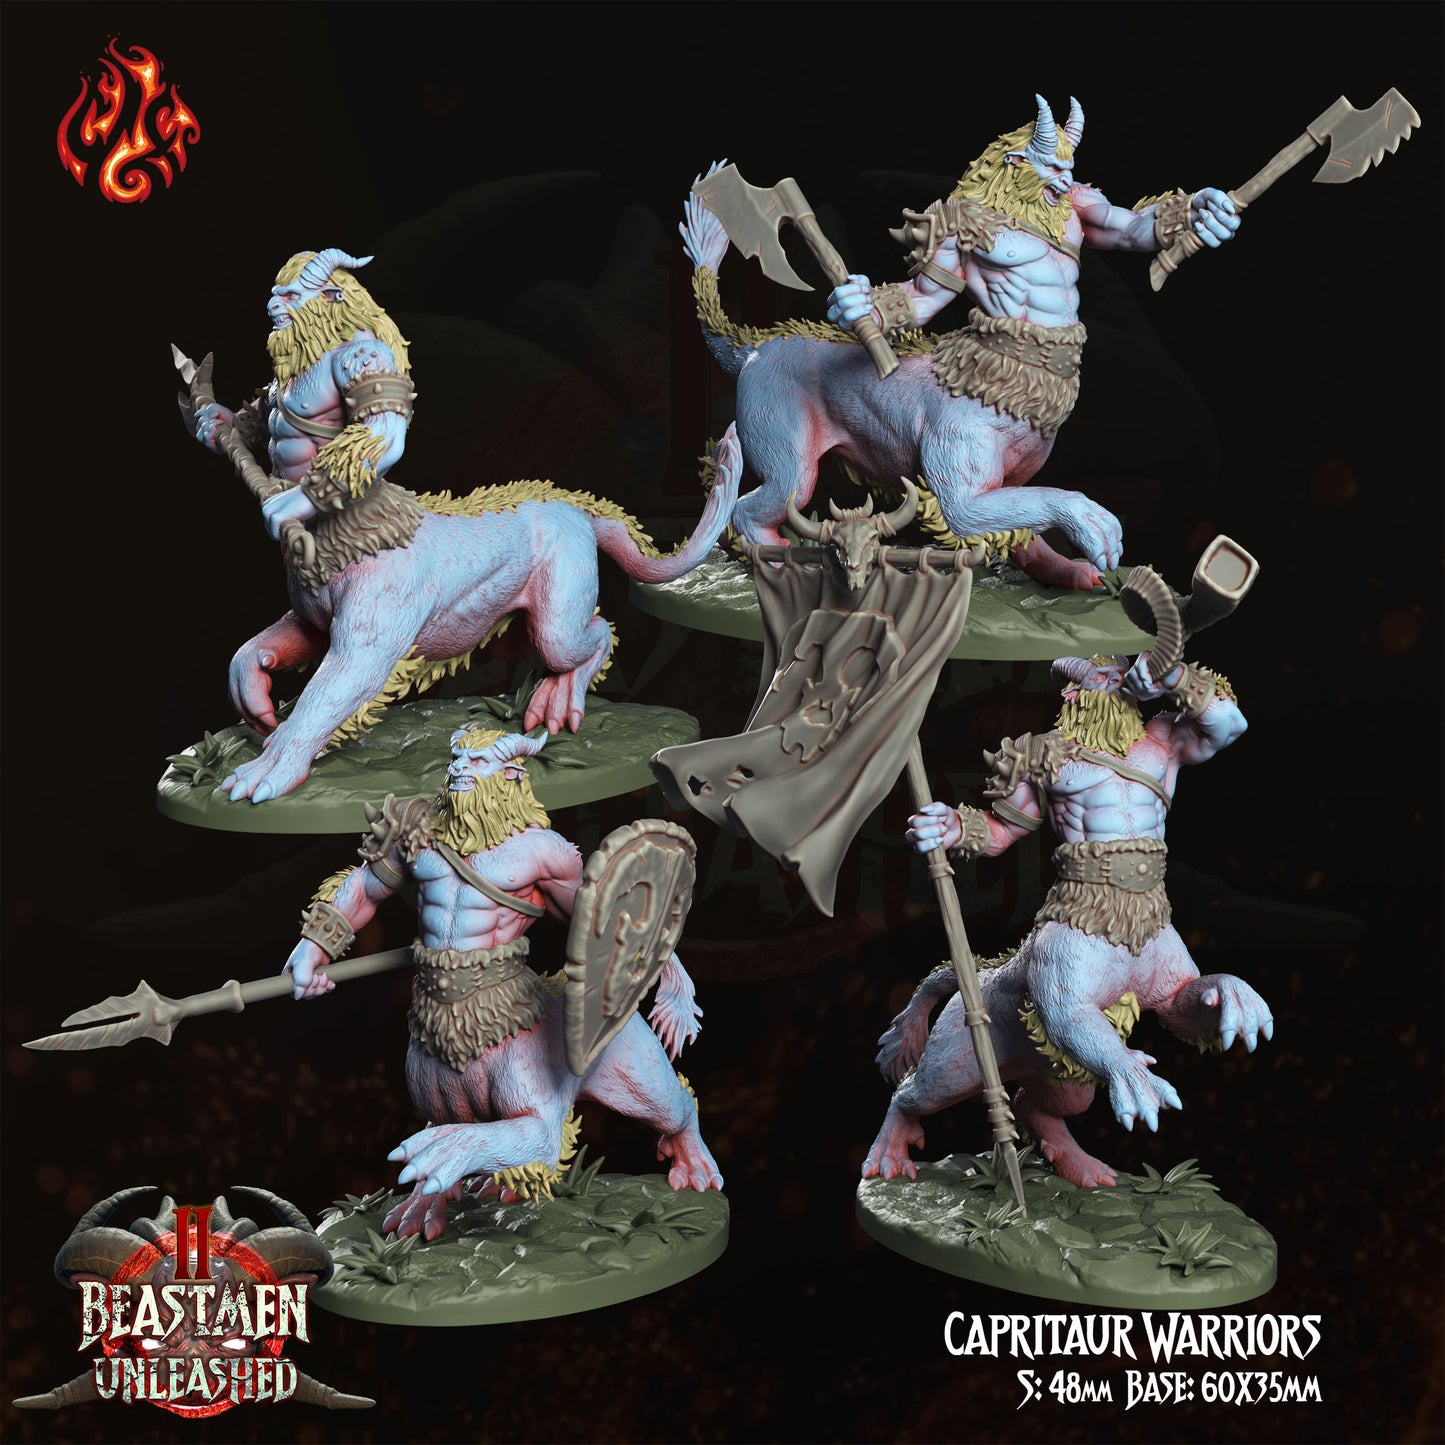 Capritaur Warriors - Beastmen Unleashed - from Crippled God Foundry - Table-top gaming mini and collectable for painting.